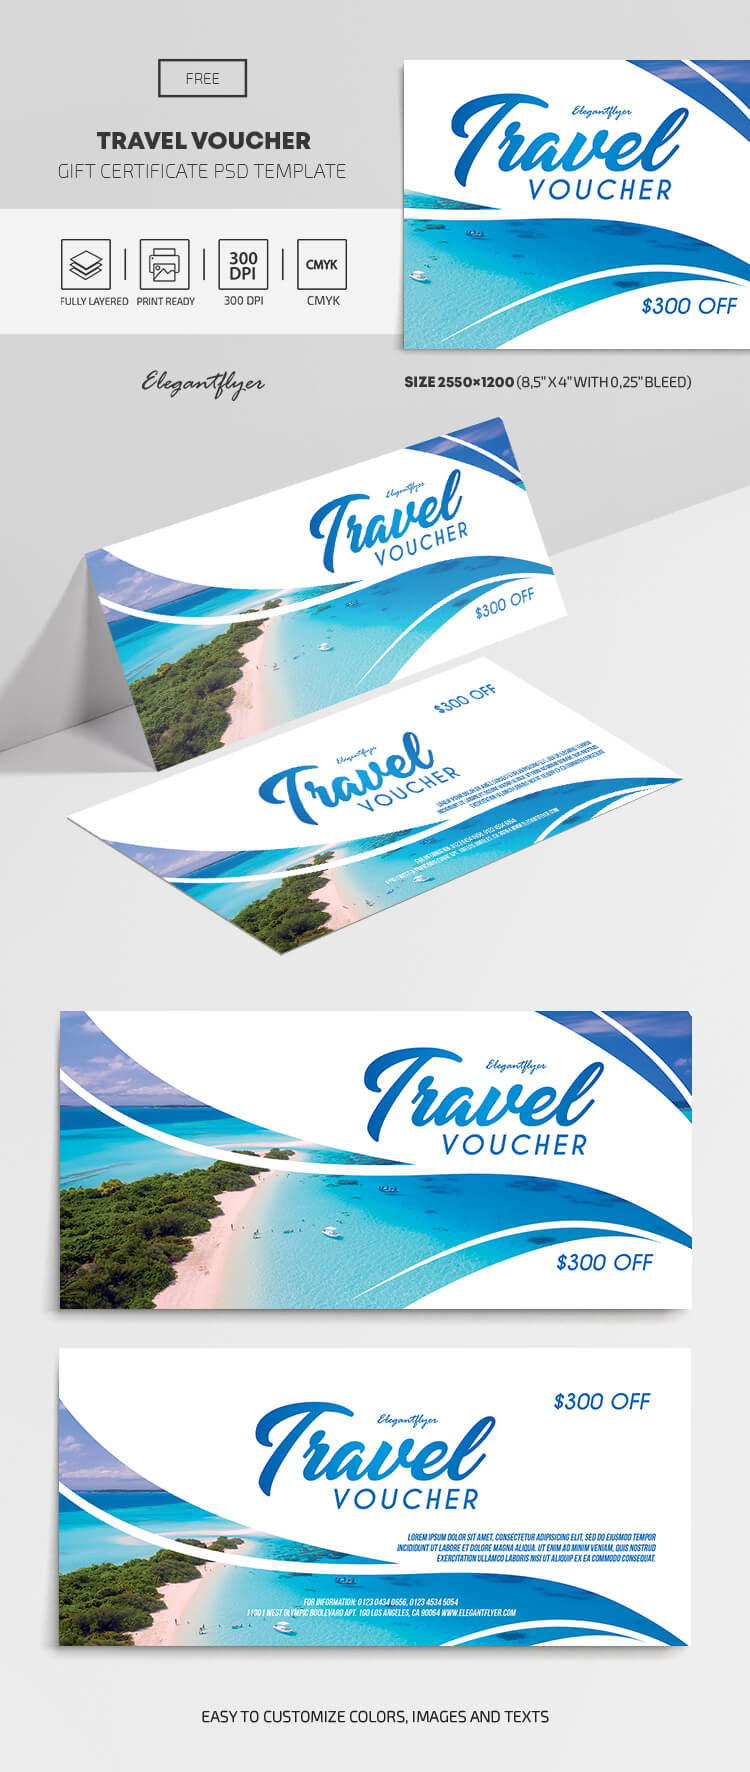 Travel Voucher – Free Gift Certificate Template – Throughout Free Travel Gift Certificate Template